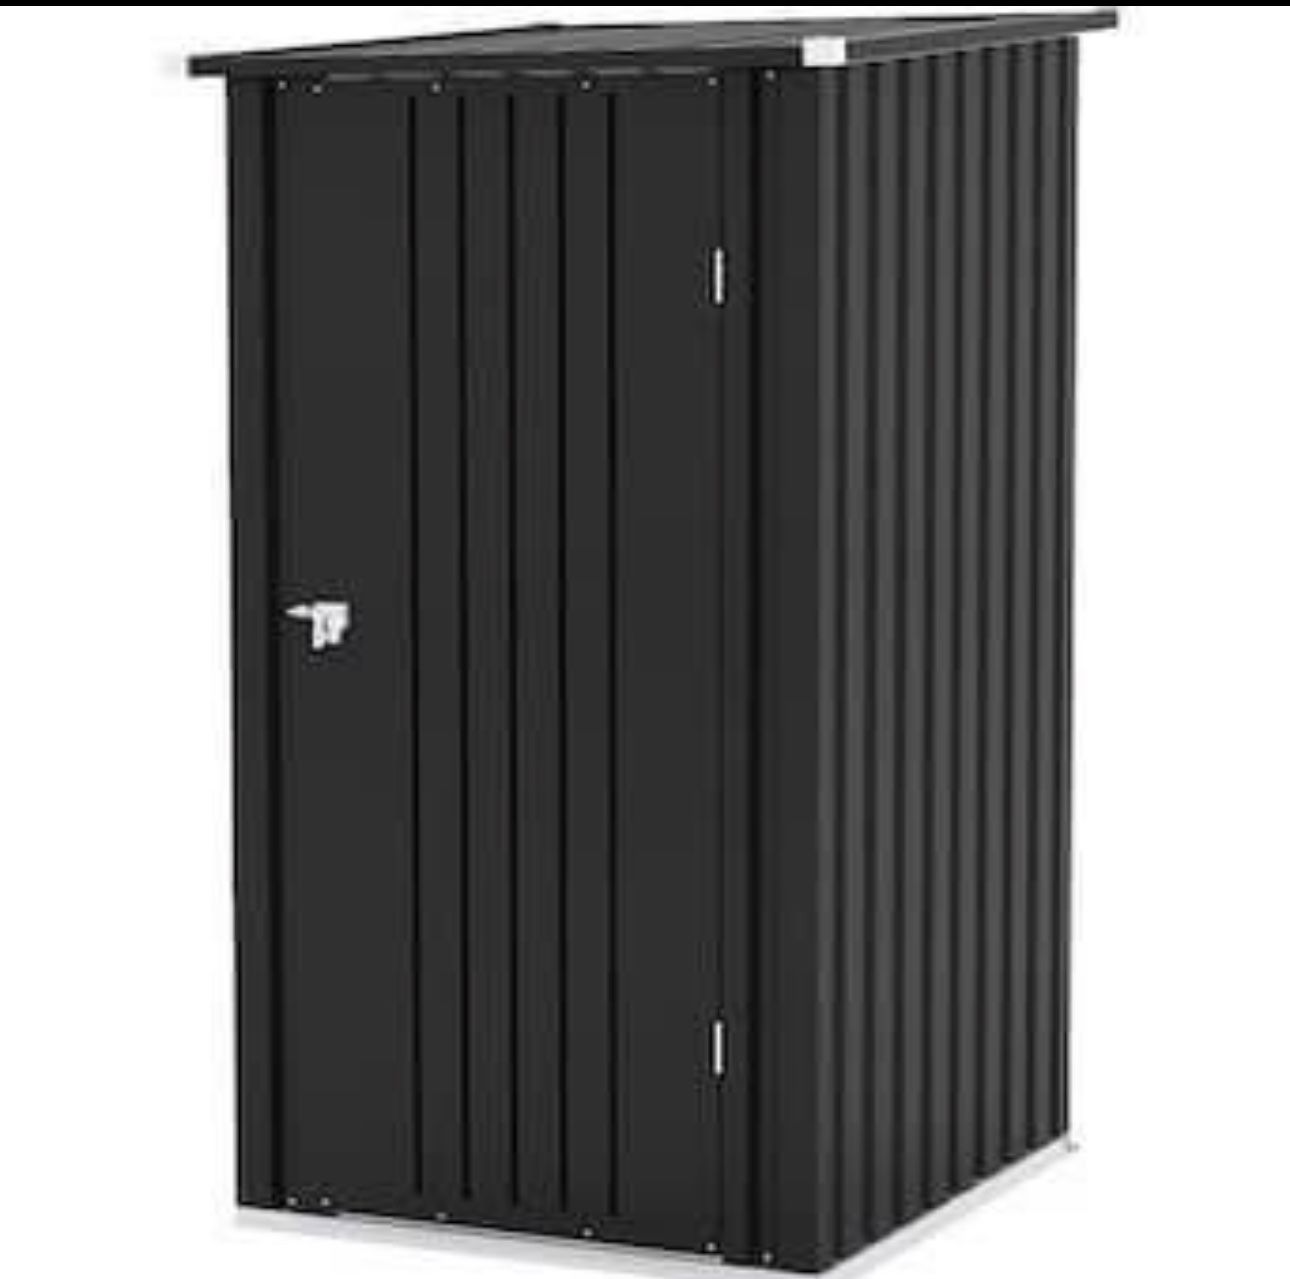 Patiowell 3-ft x 3-ft Galvanized Steel Storage Shed